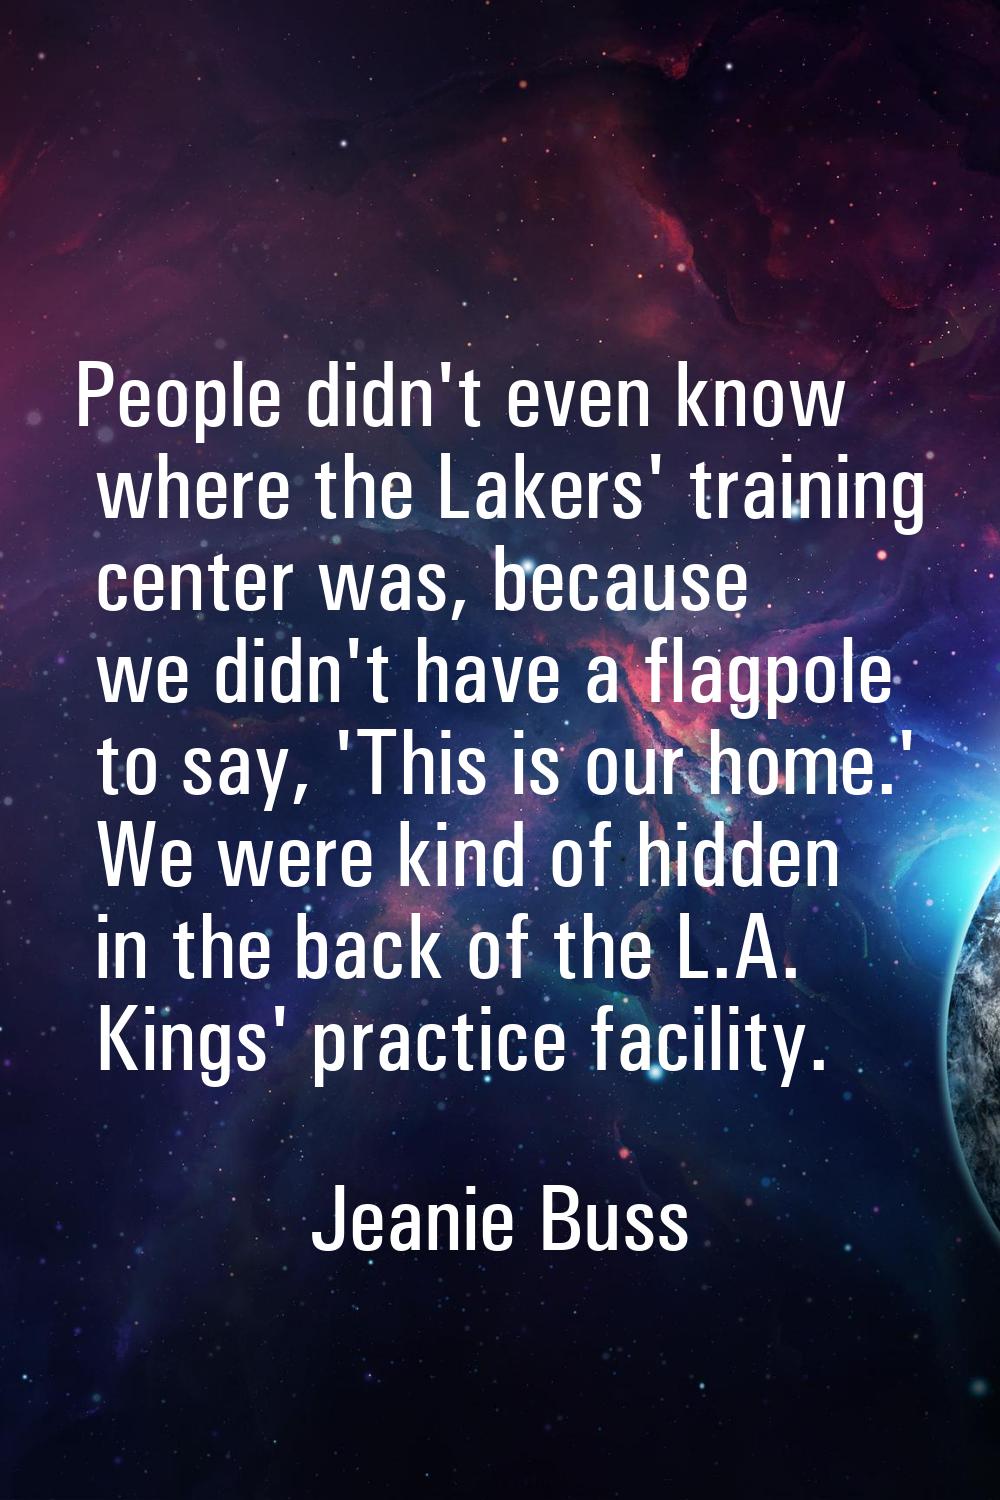 People didn't even know where the Lakers' training center was, because we didn't have a flagpole to